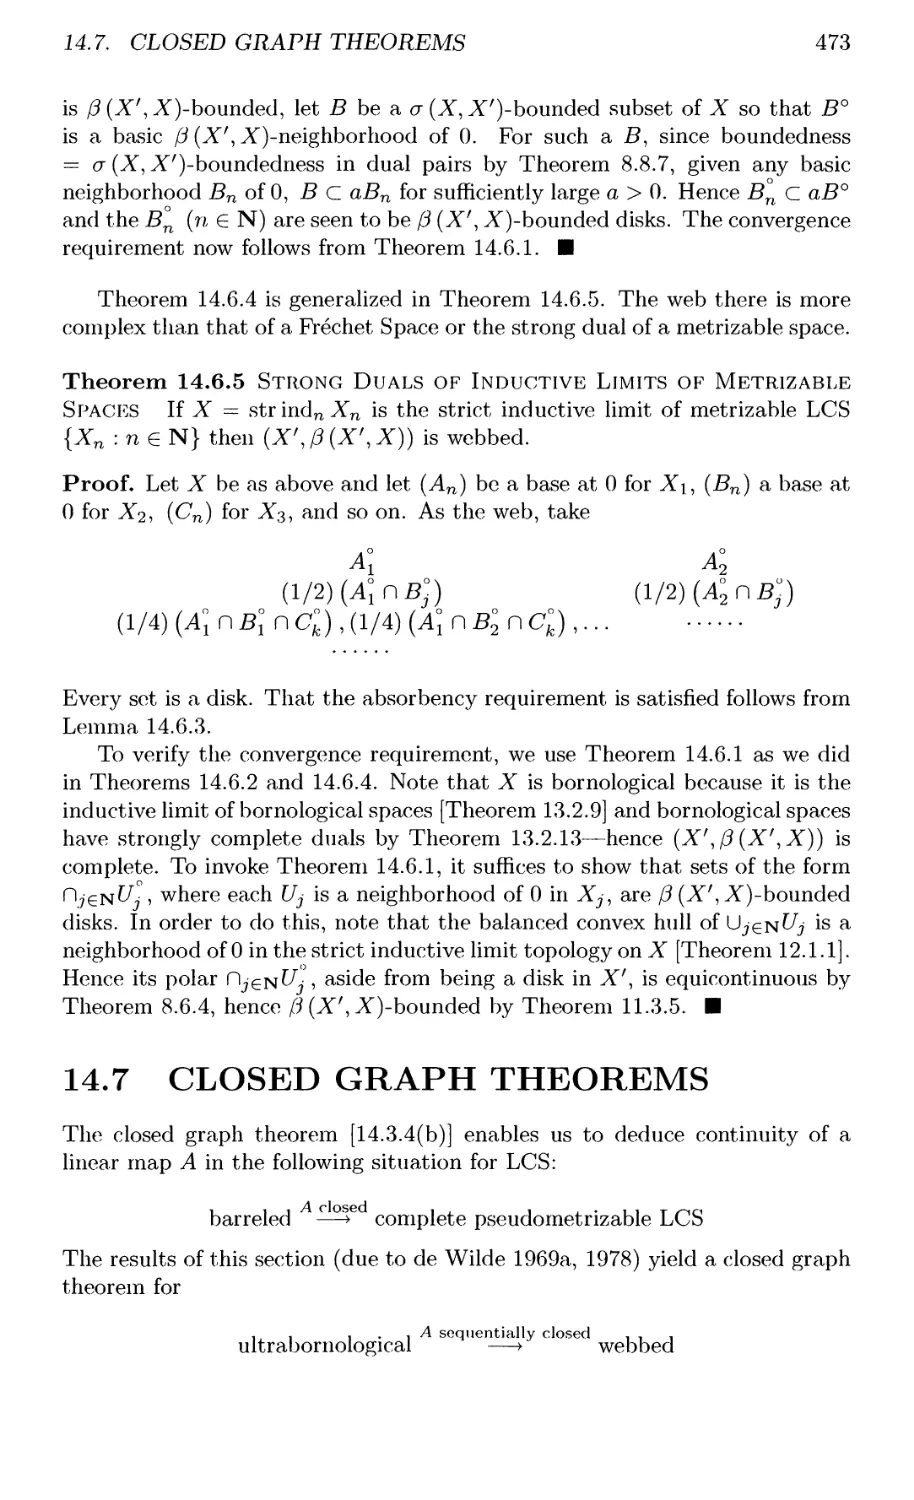 14.7 CLOSED GRAPH THEOREMS